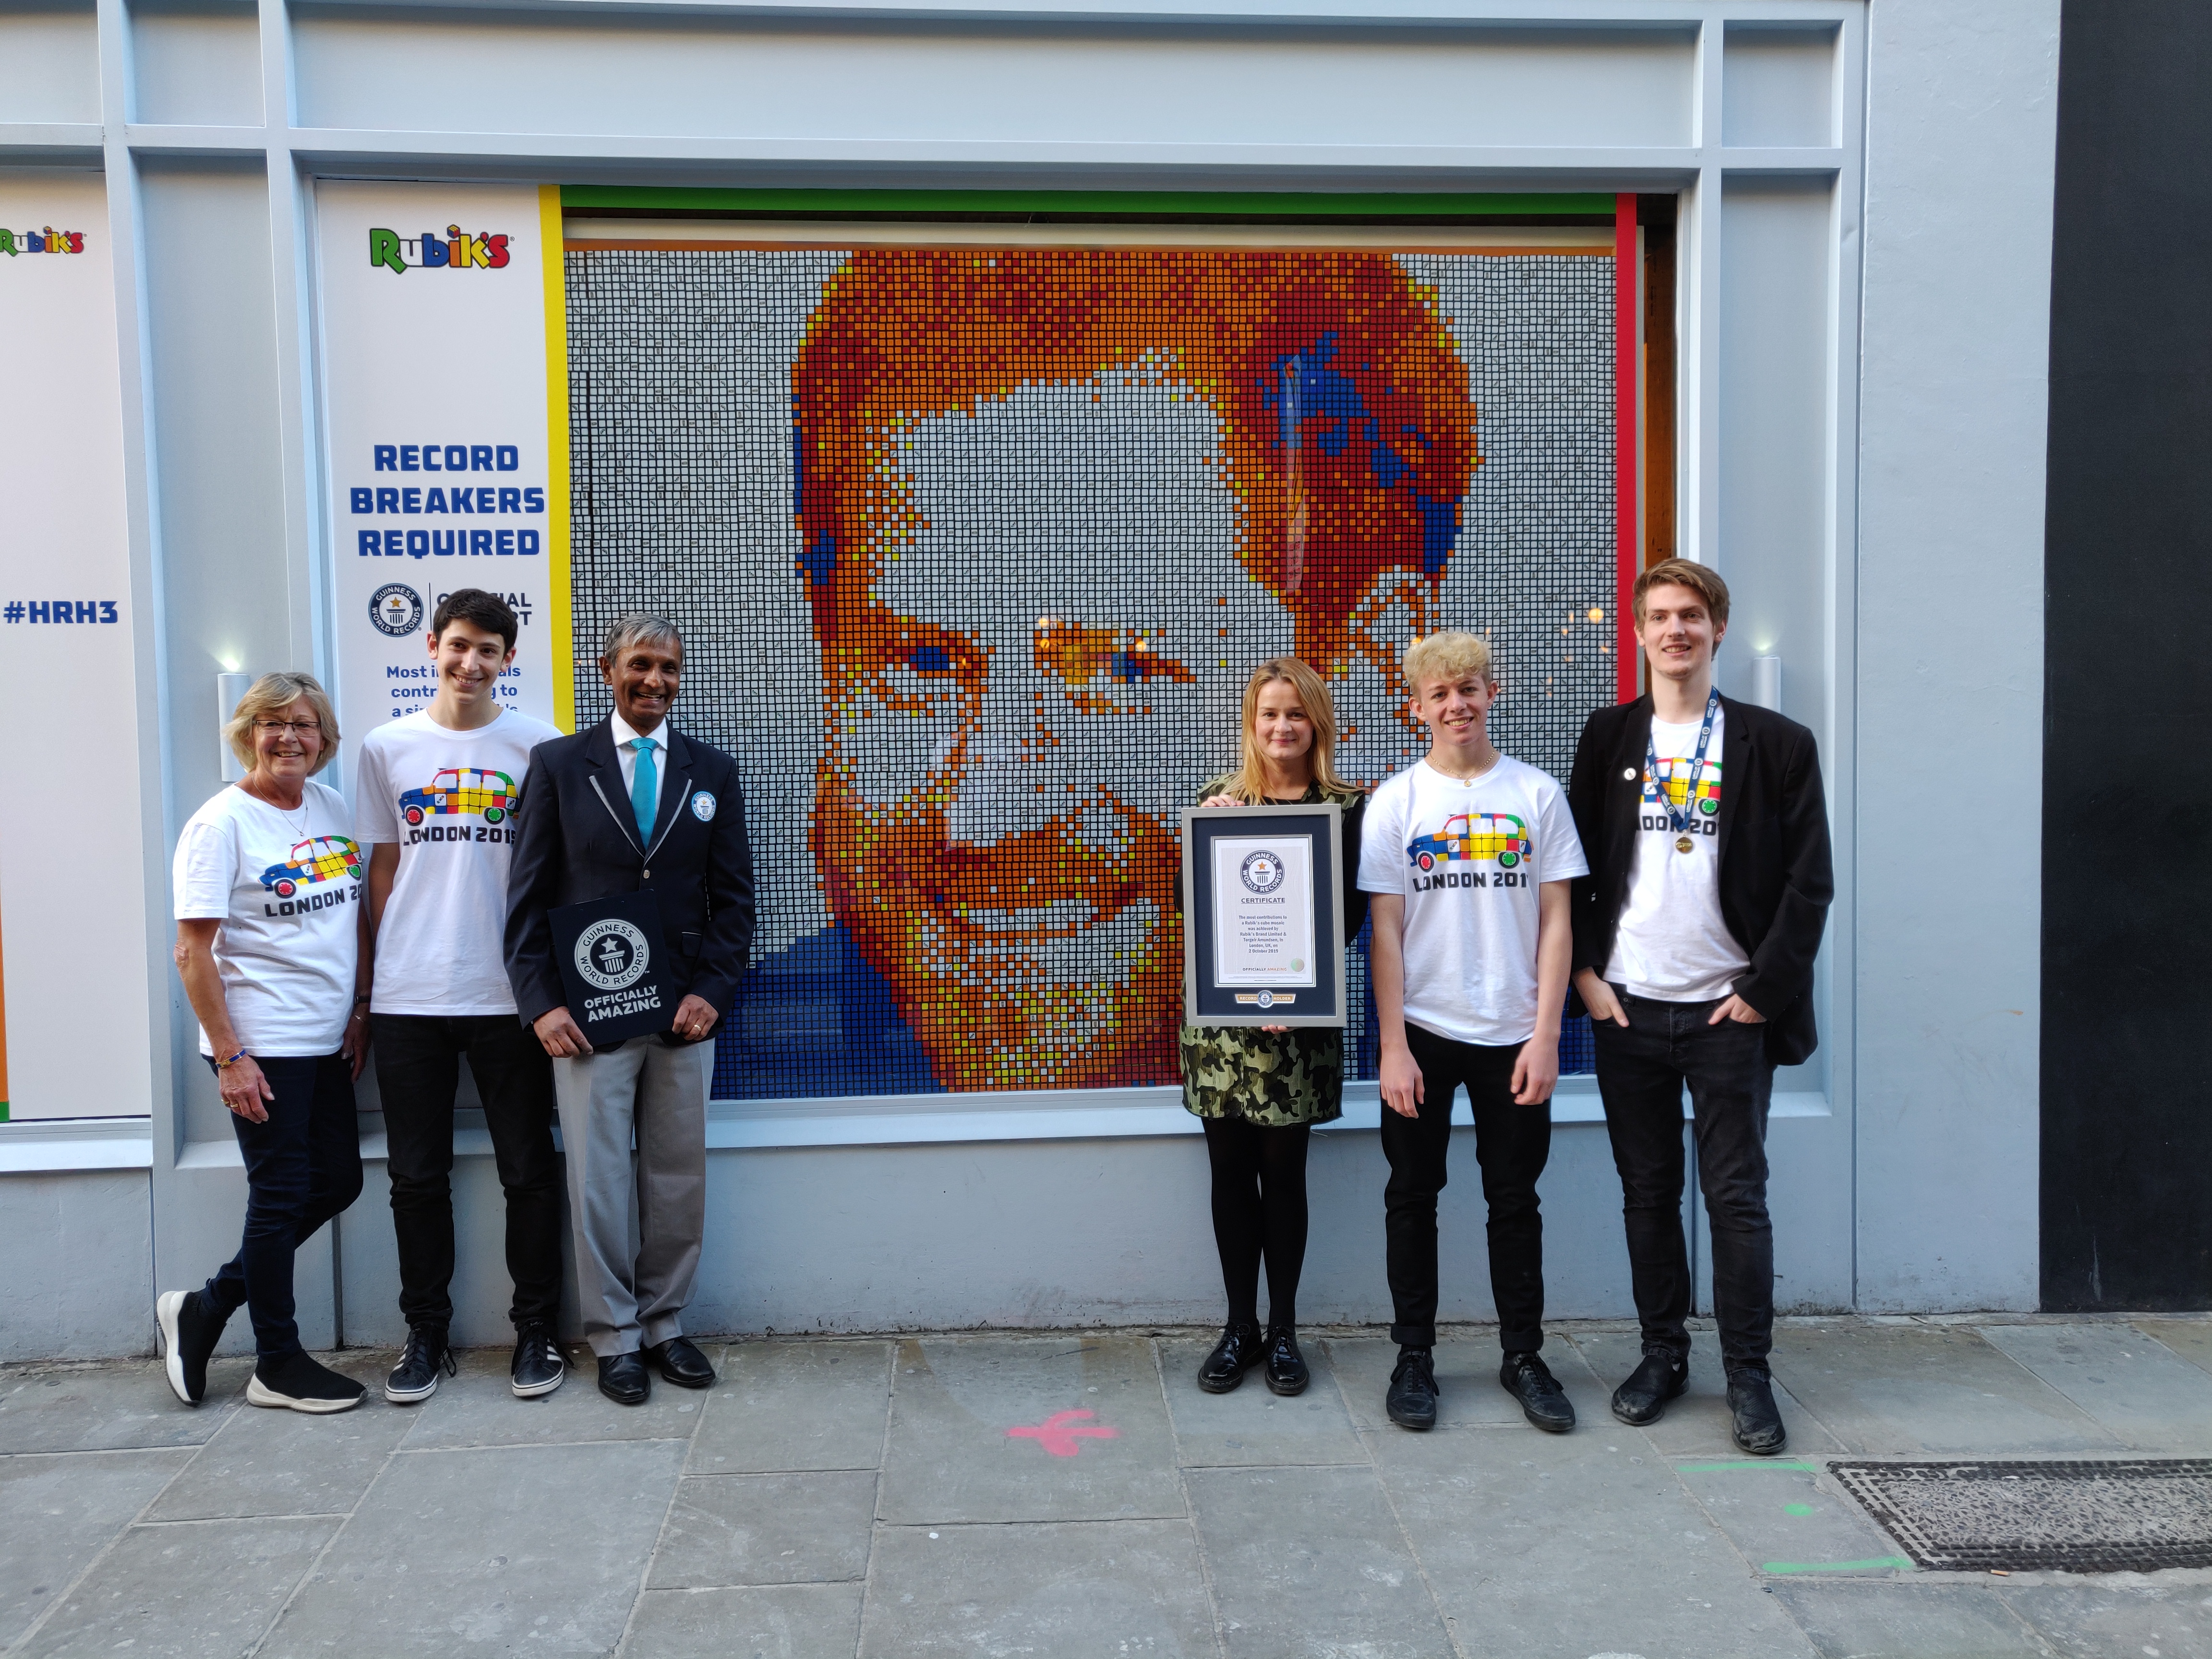 Rubik S Cube Breaks Guinness World Record With Hrh Prince Harry Mosaic